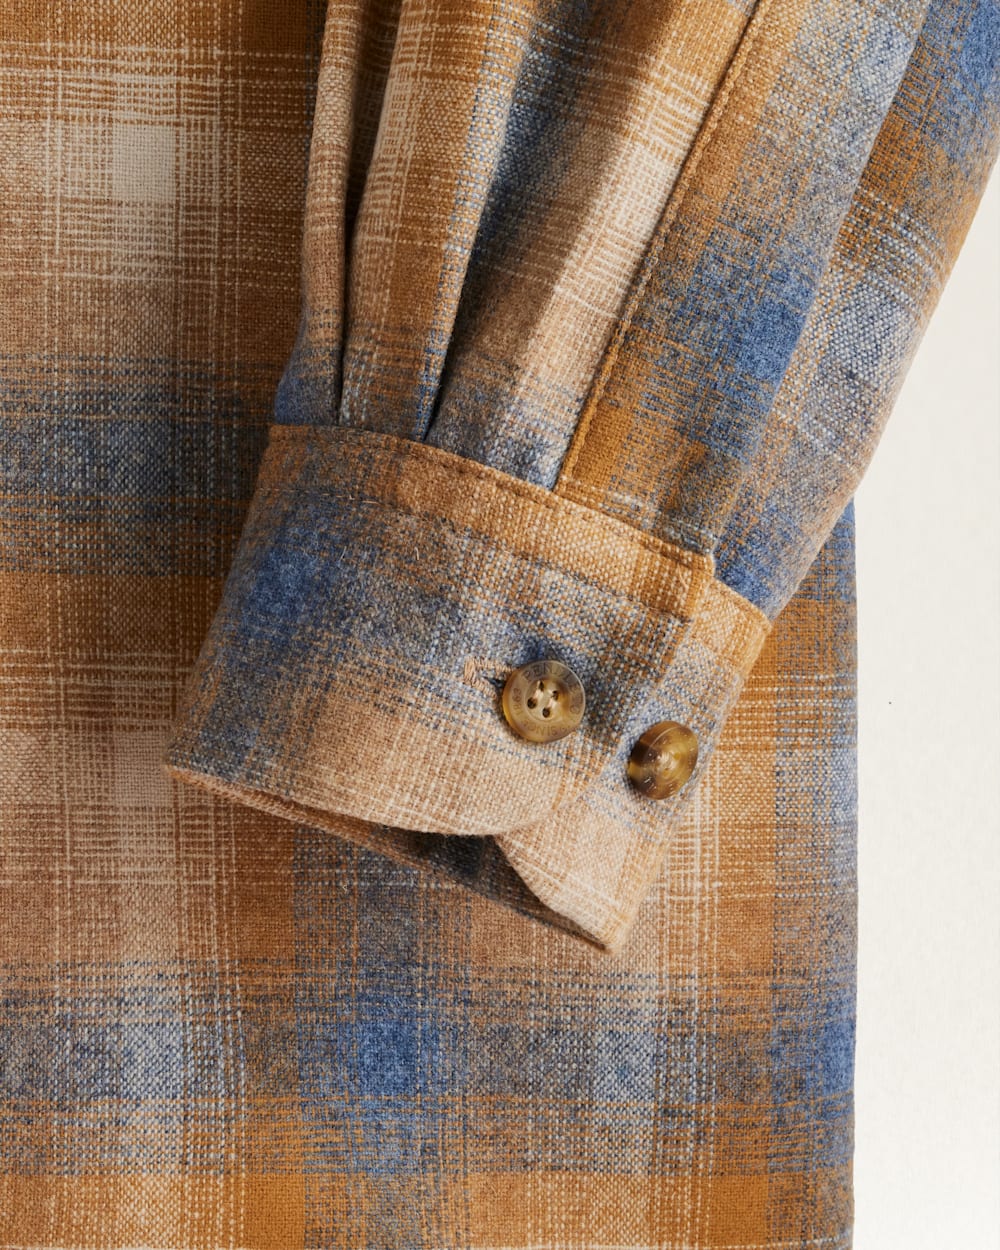 ALTERNATE VIEW OF MEN'S BOARD SHIRT IN TAN/COPPER/BLUE PLAID image number 3